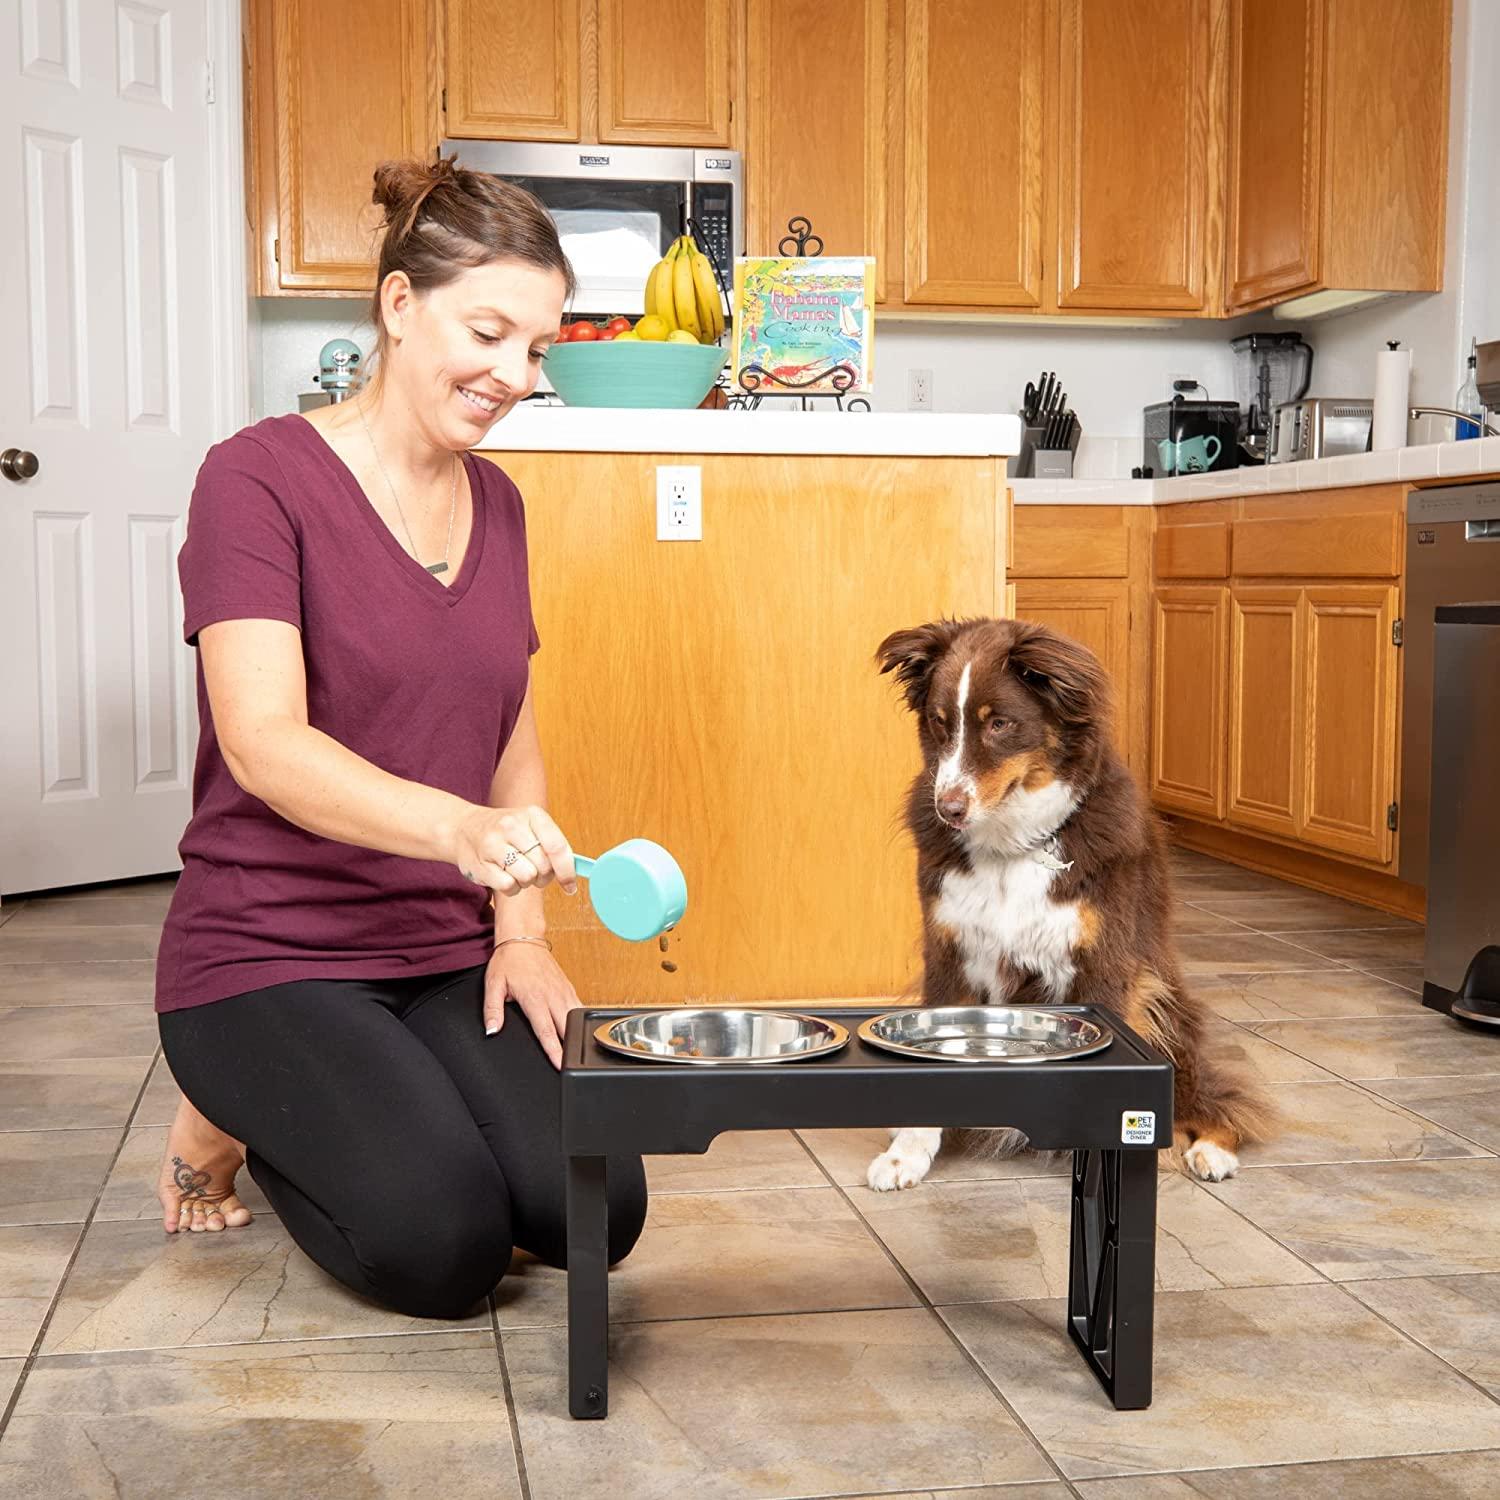 Dropship Elevated Dog Bowls For Medium Large Sized Dogs, Adjustable Heights Raised  Dog Feeder Bowl With Stand For Food & Water to Sell Online at a Lower Price